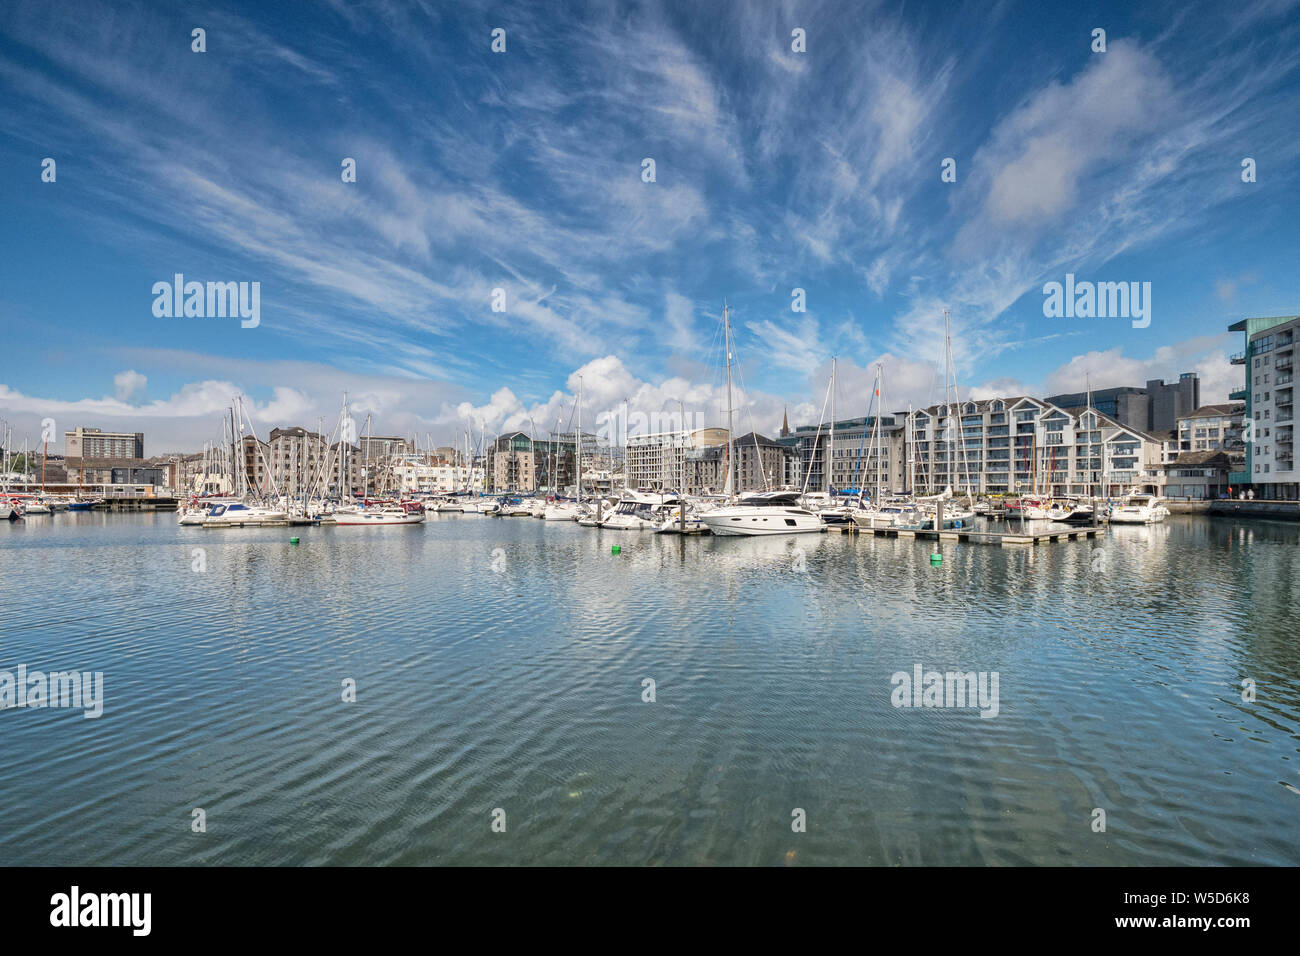 2 June 2018: Plymouth, Devon, UK - New apartment blocks on the waterfront in Plymouth Barbican. Stock Photo